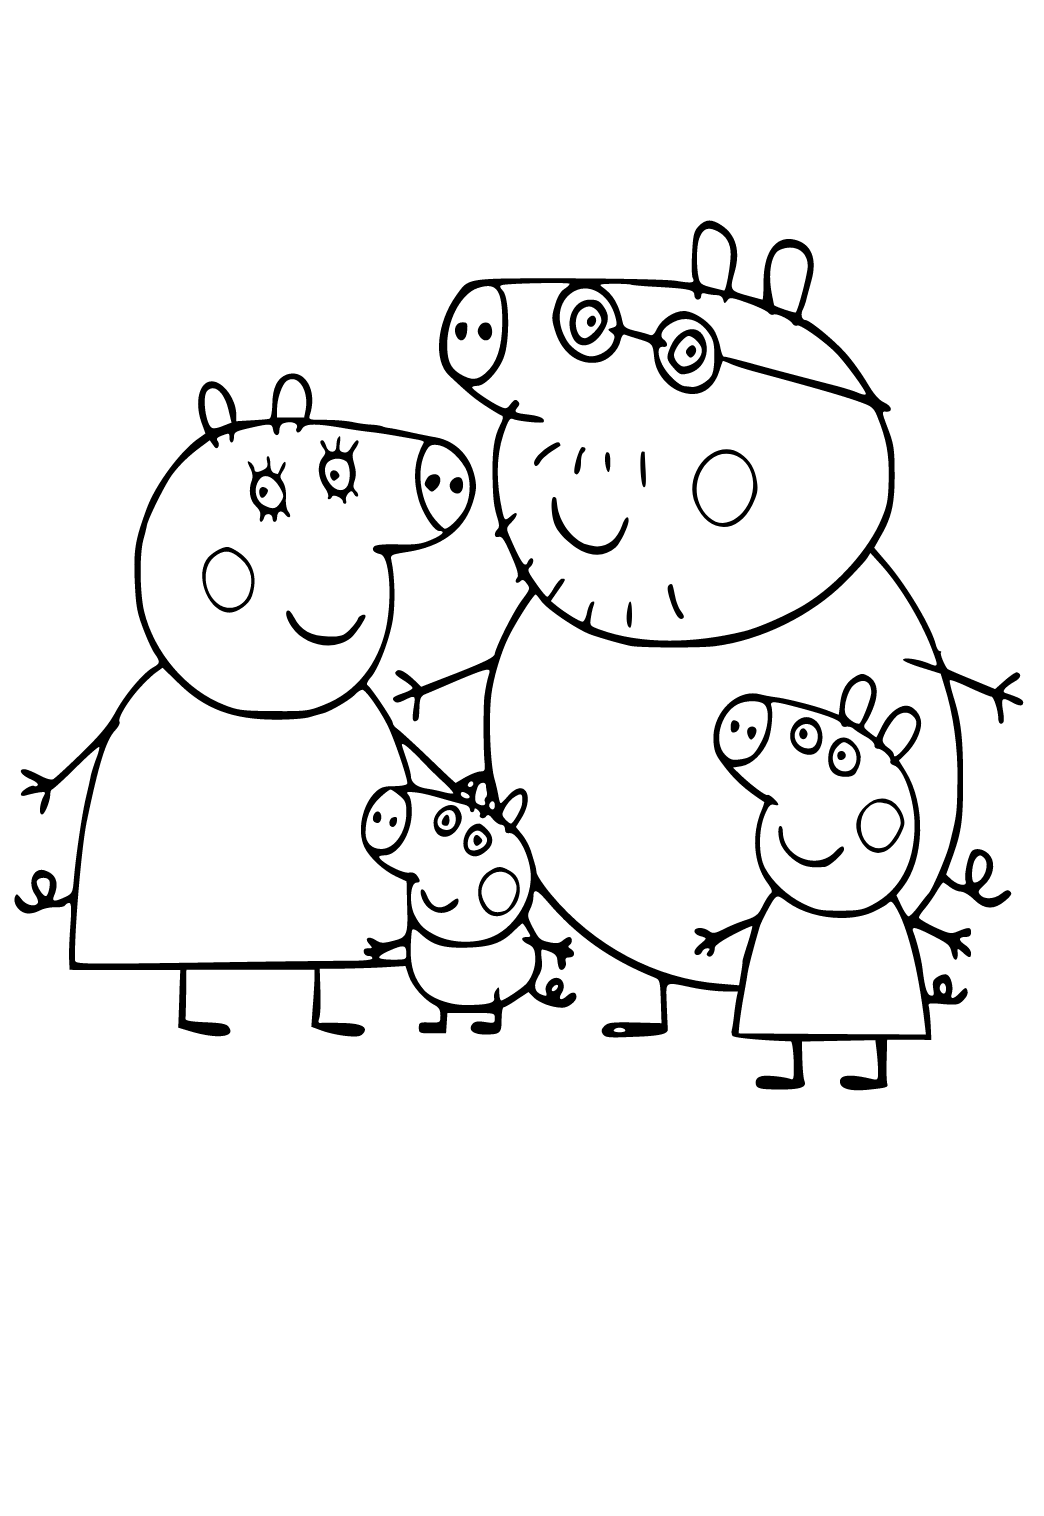 peppa pig coloring for kids on Pinterest